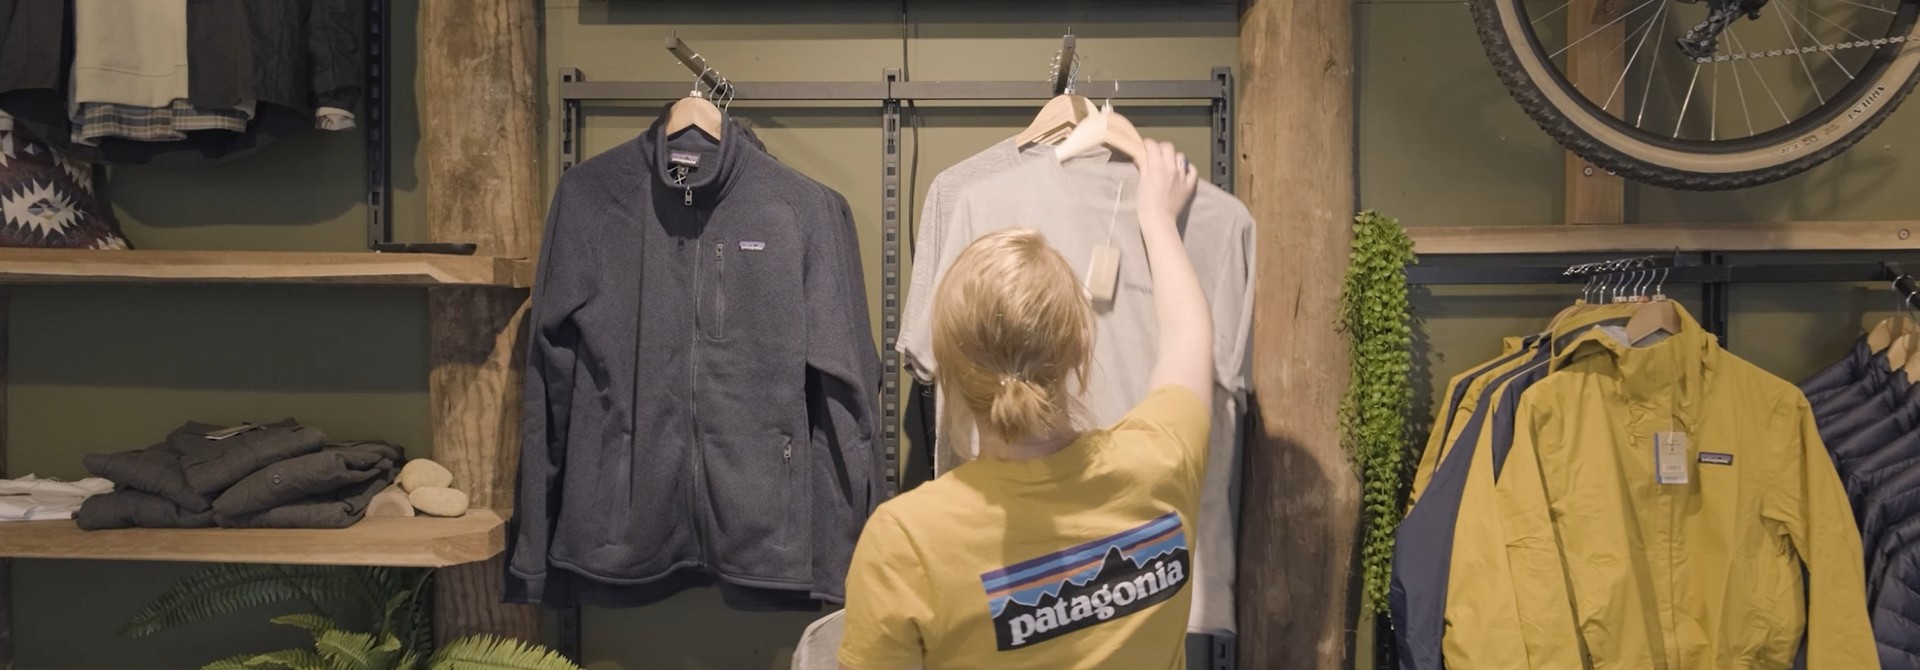 Welcome Patagonia to the BikeNOW family